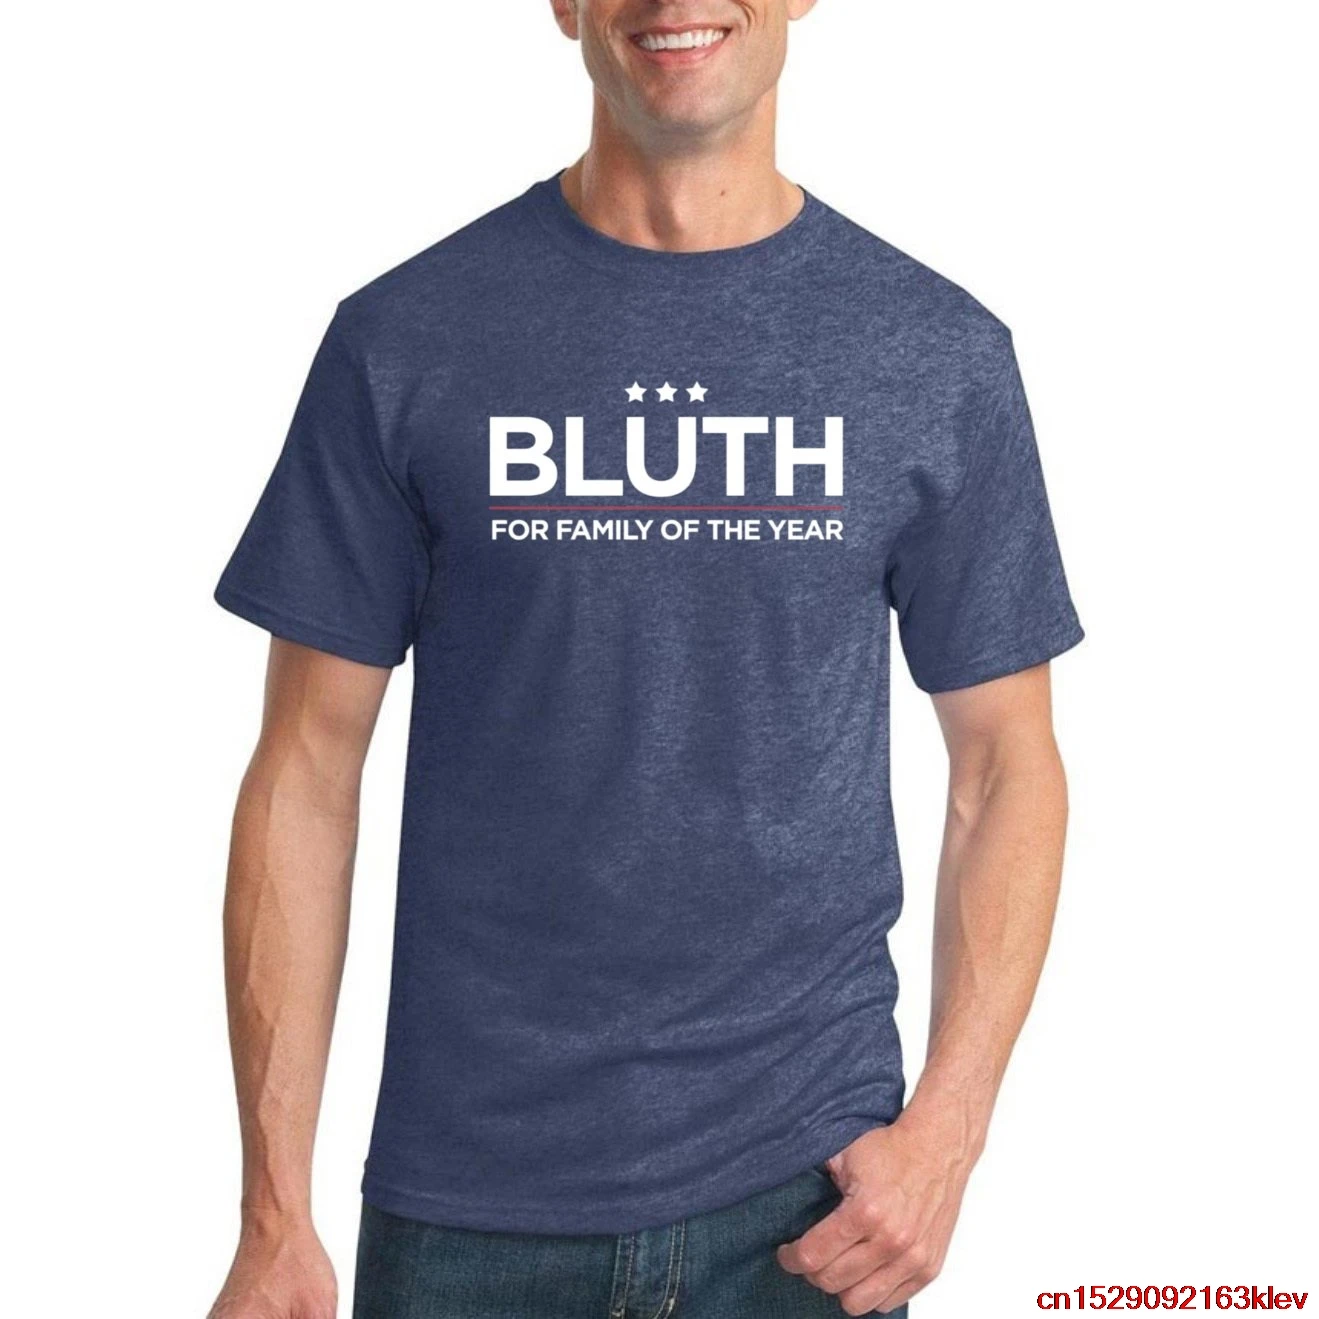 ARRESTED BLUTH COMPANY STAIR CAR DEVELOPMENT UNOFFICIAL ADULTS & KIDS T-SHIRT